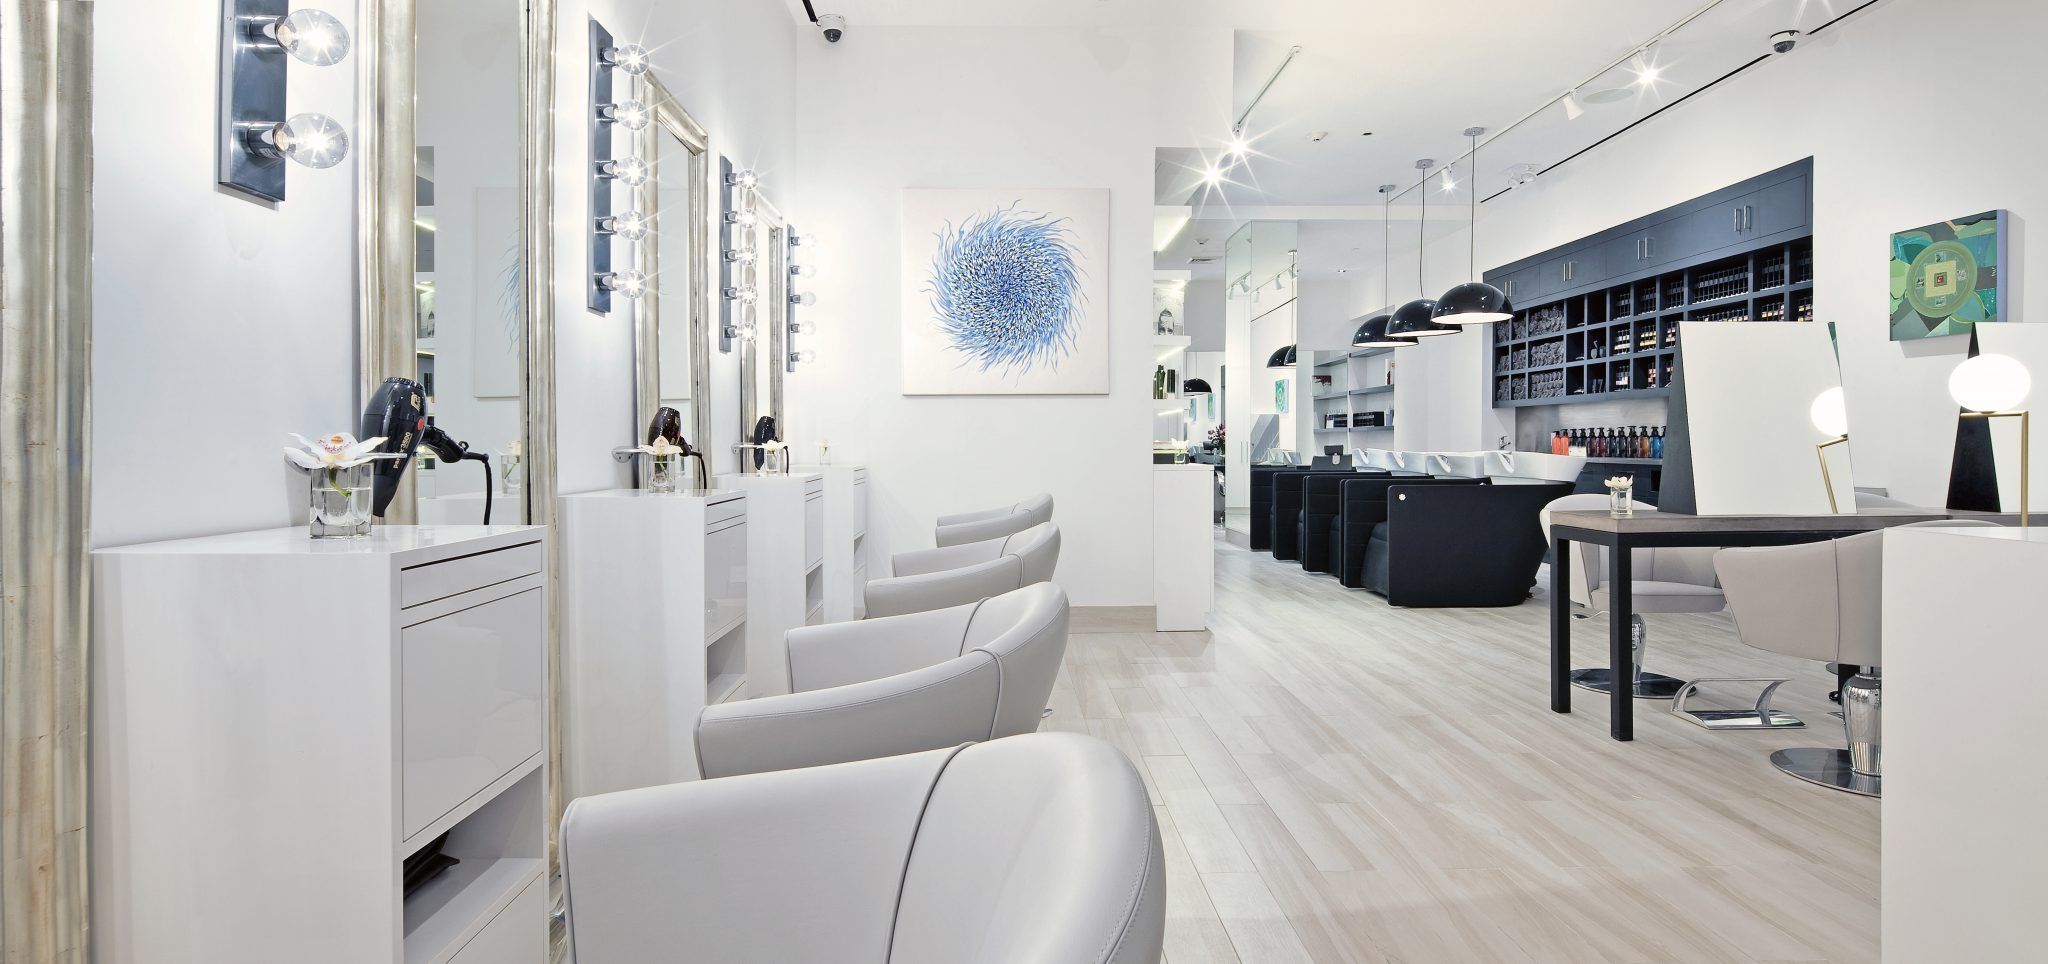 About Us | The Best Hair Salon In NYC | Fabio Scalia